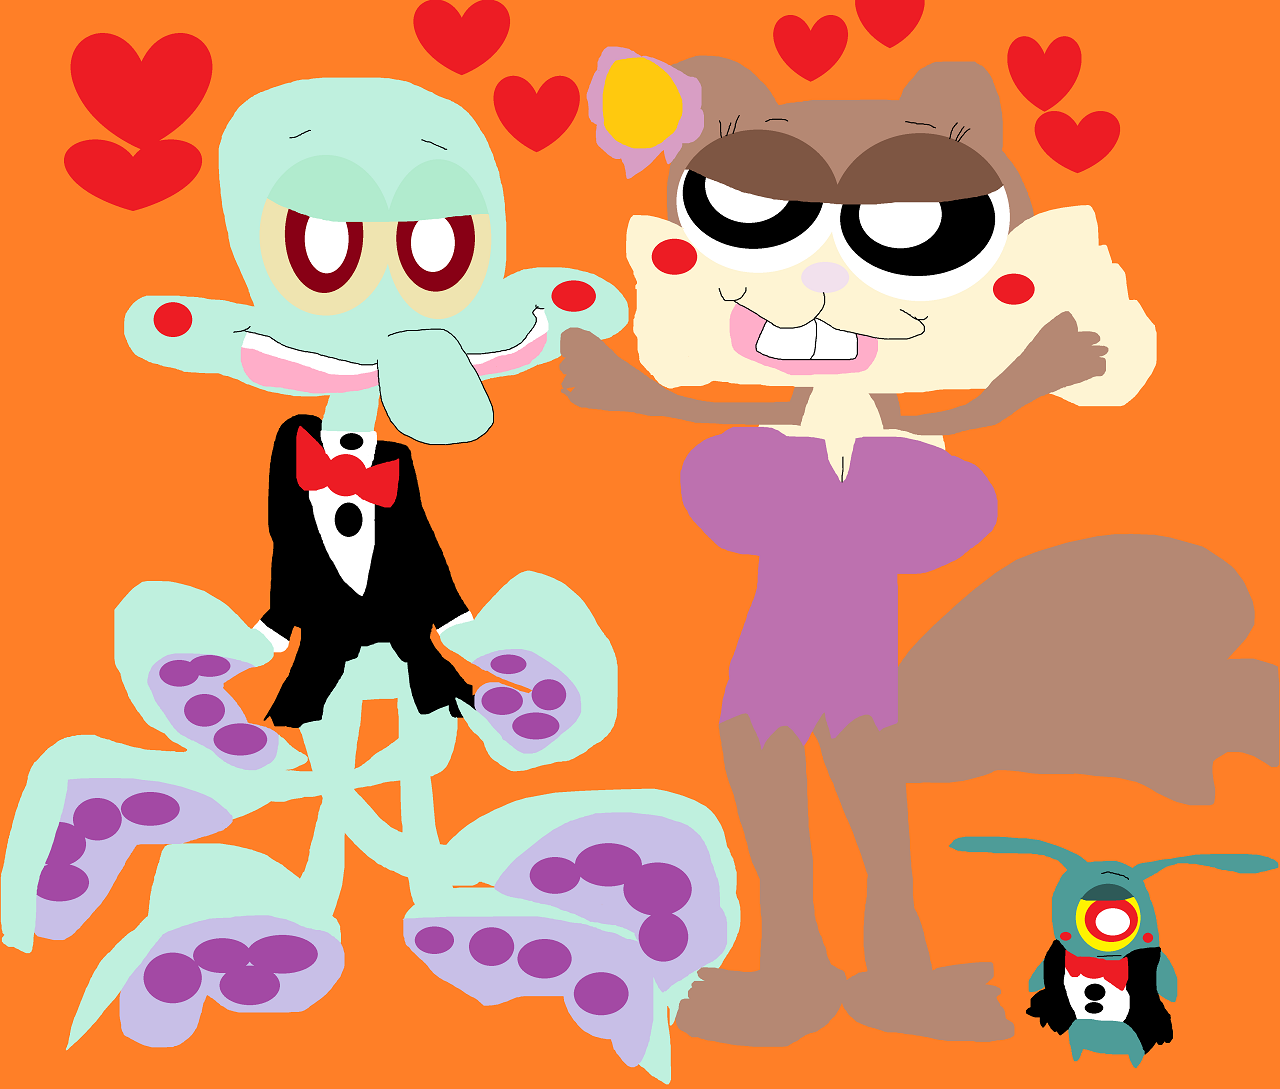 A Nervous Squidward On A Fancy Date With Sandy Plankton Added by Falconlobo